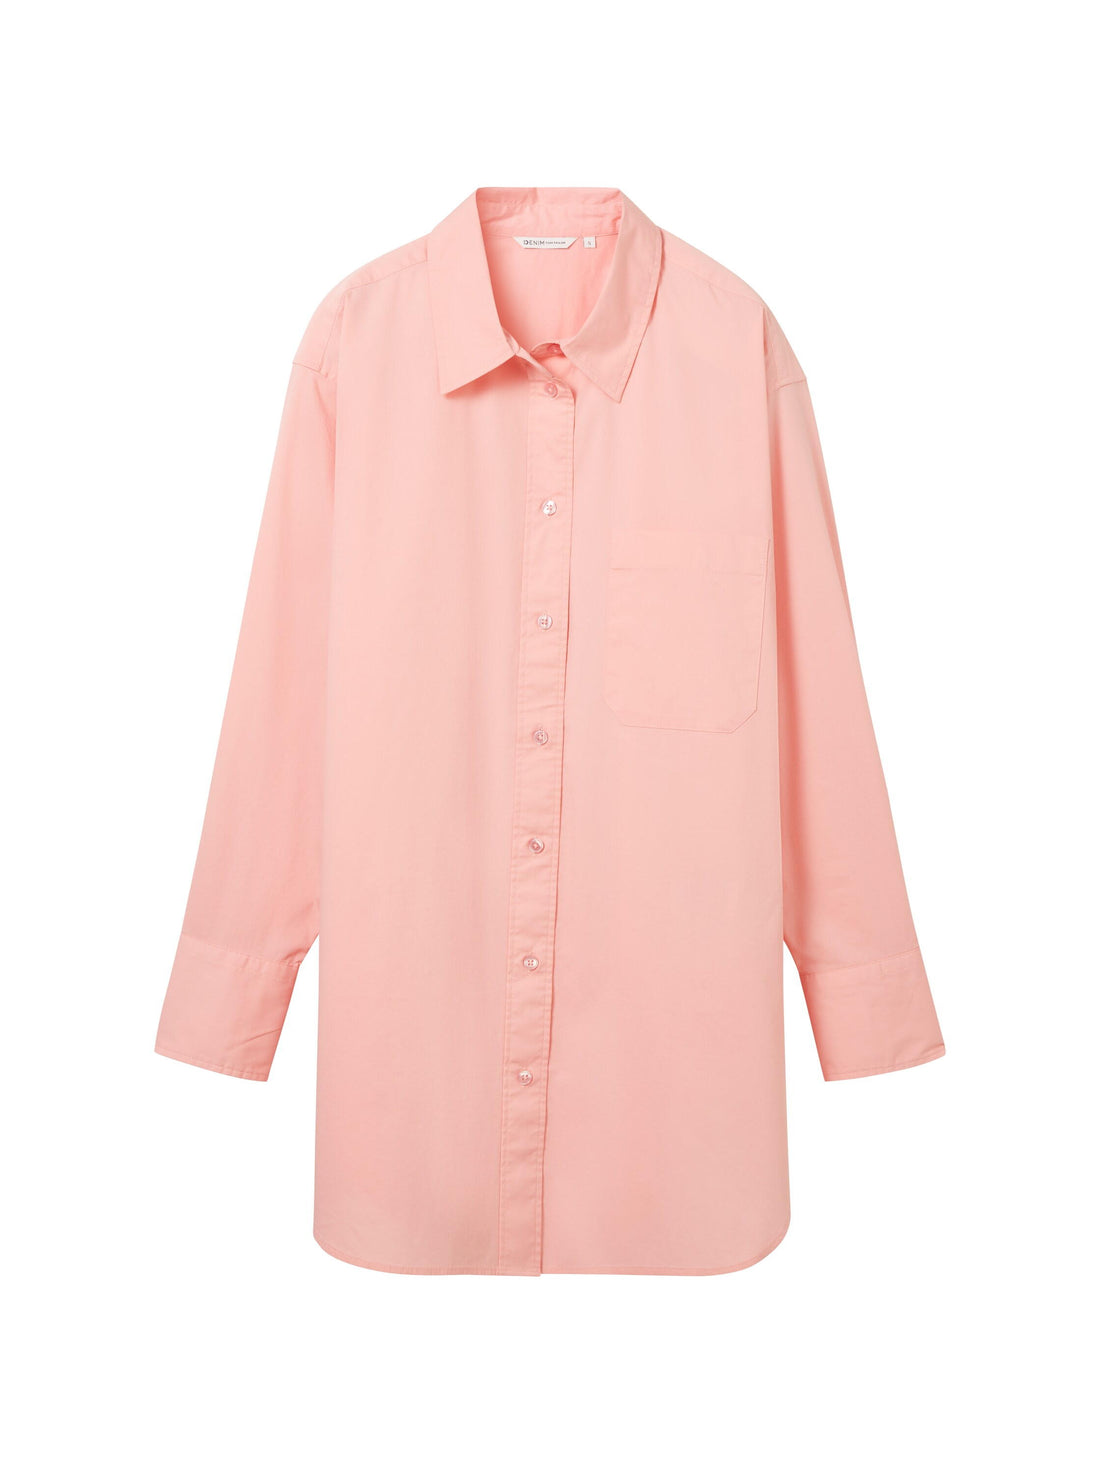 Long Shirt With Chest Pocket_1032792_21171_02